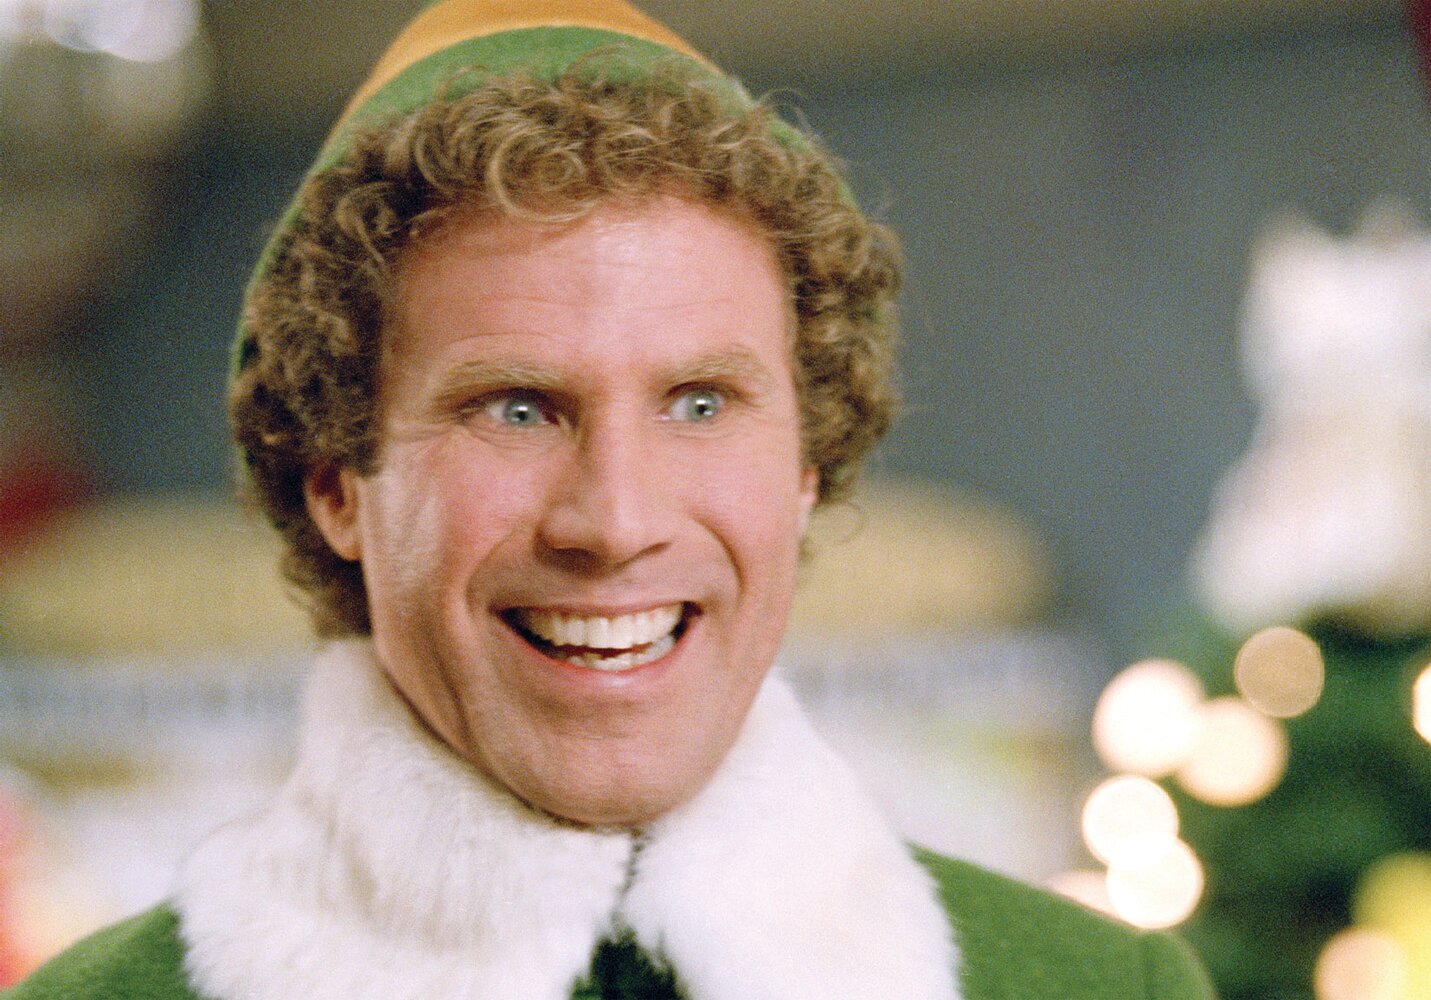 In 2003, Will Ferrell starred in the hit holiday movie "Elf."